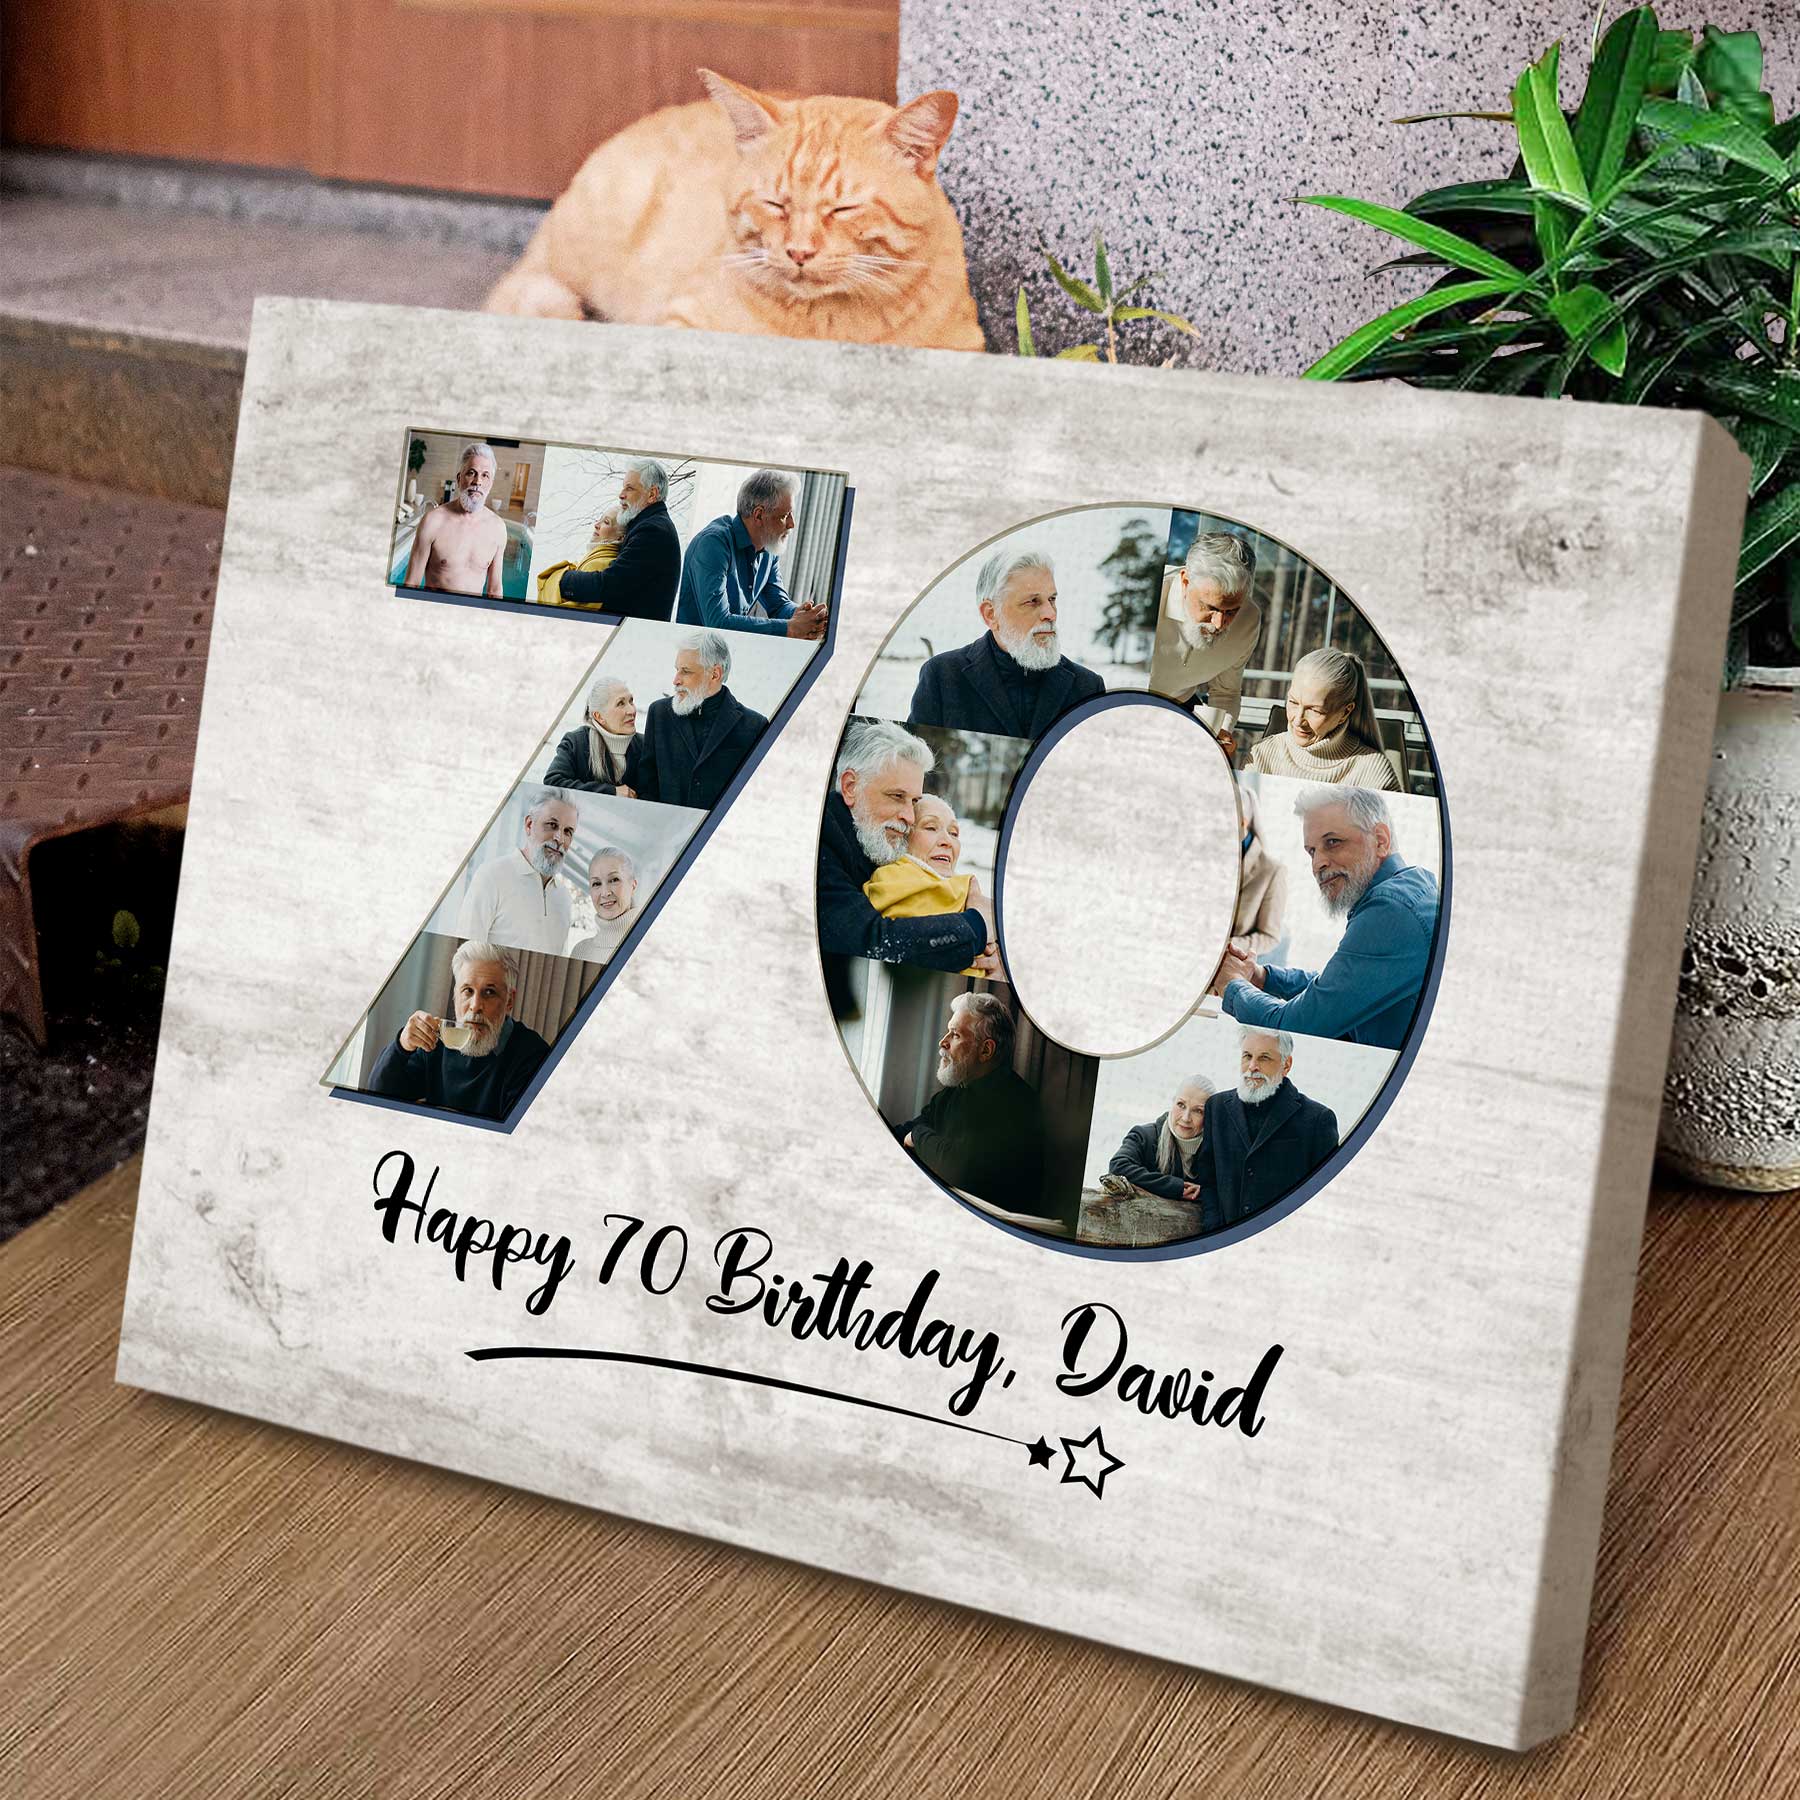 b9685a70 4721 11ed 83ba 0242ac120002 Personalized 70th Birthday Gifts For Dad For Men 70th Birthday Photo Collage Canvas 70th Anniversary Gift Idea 3